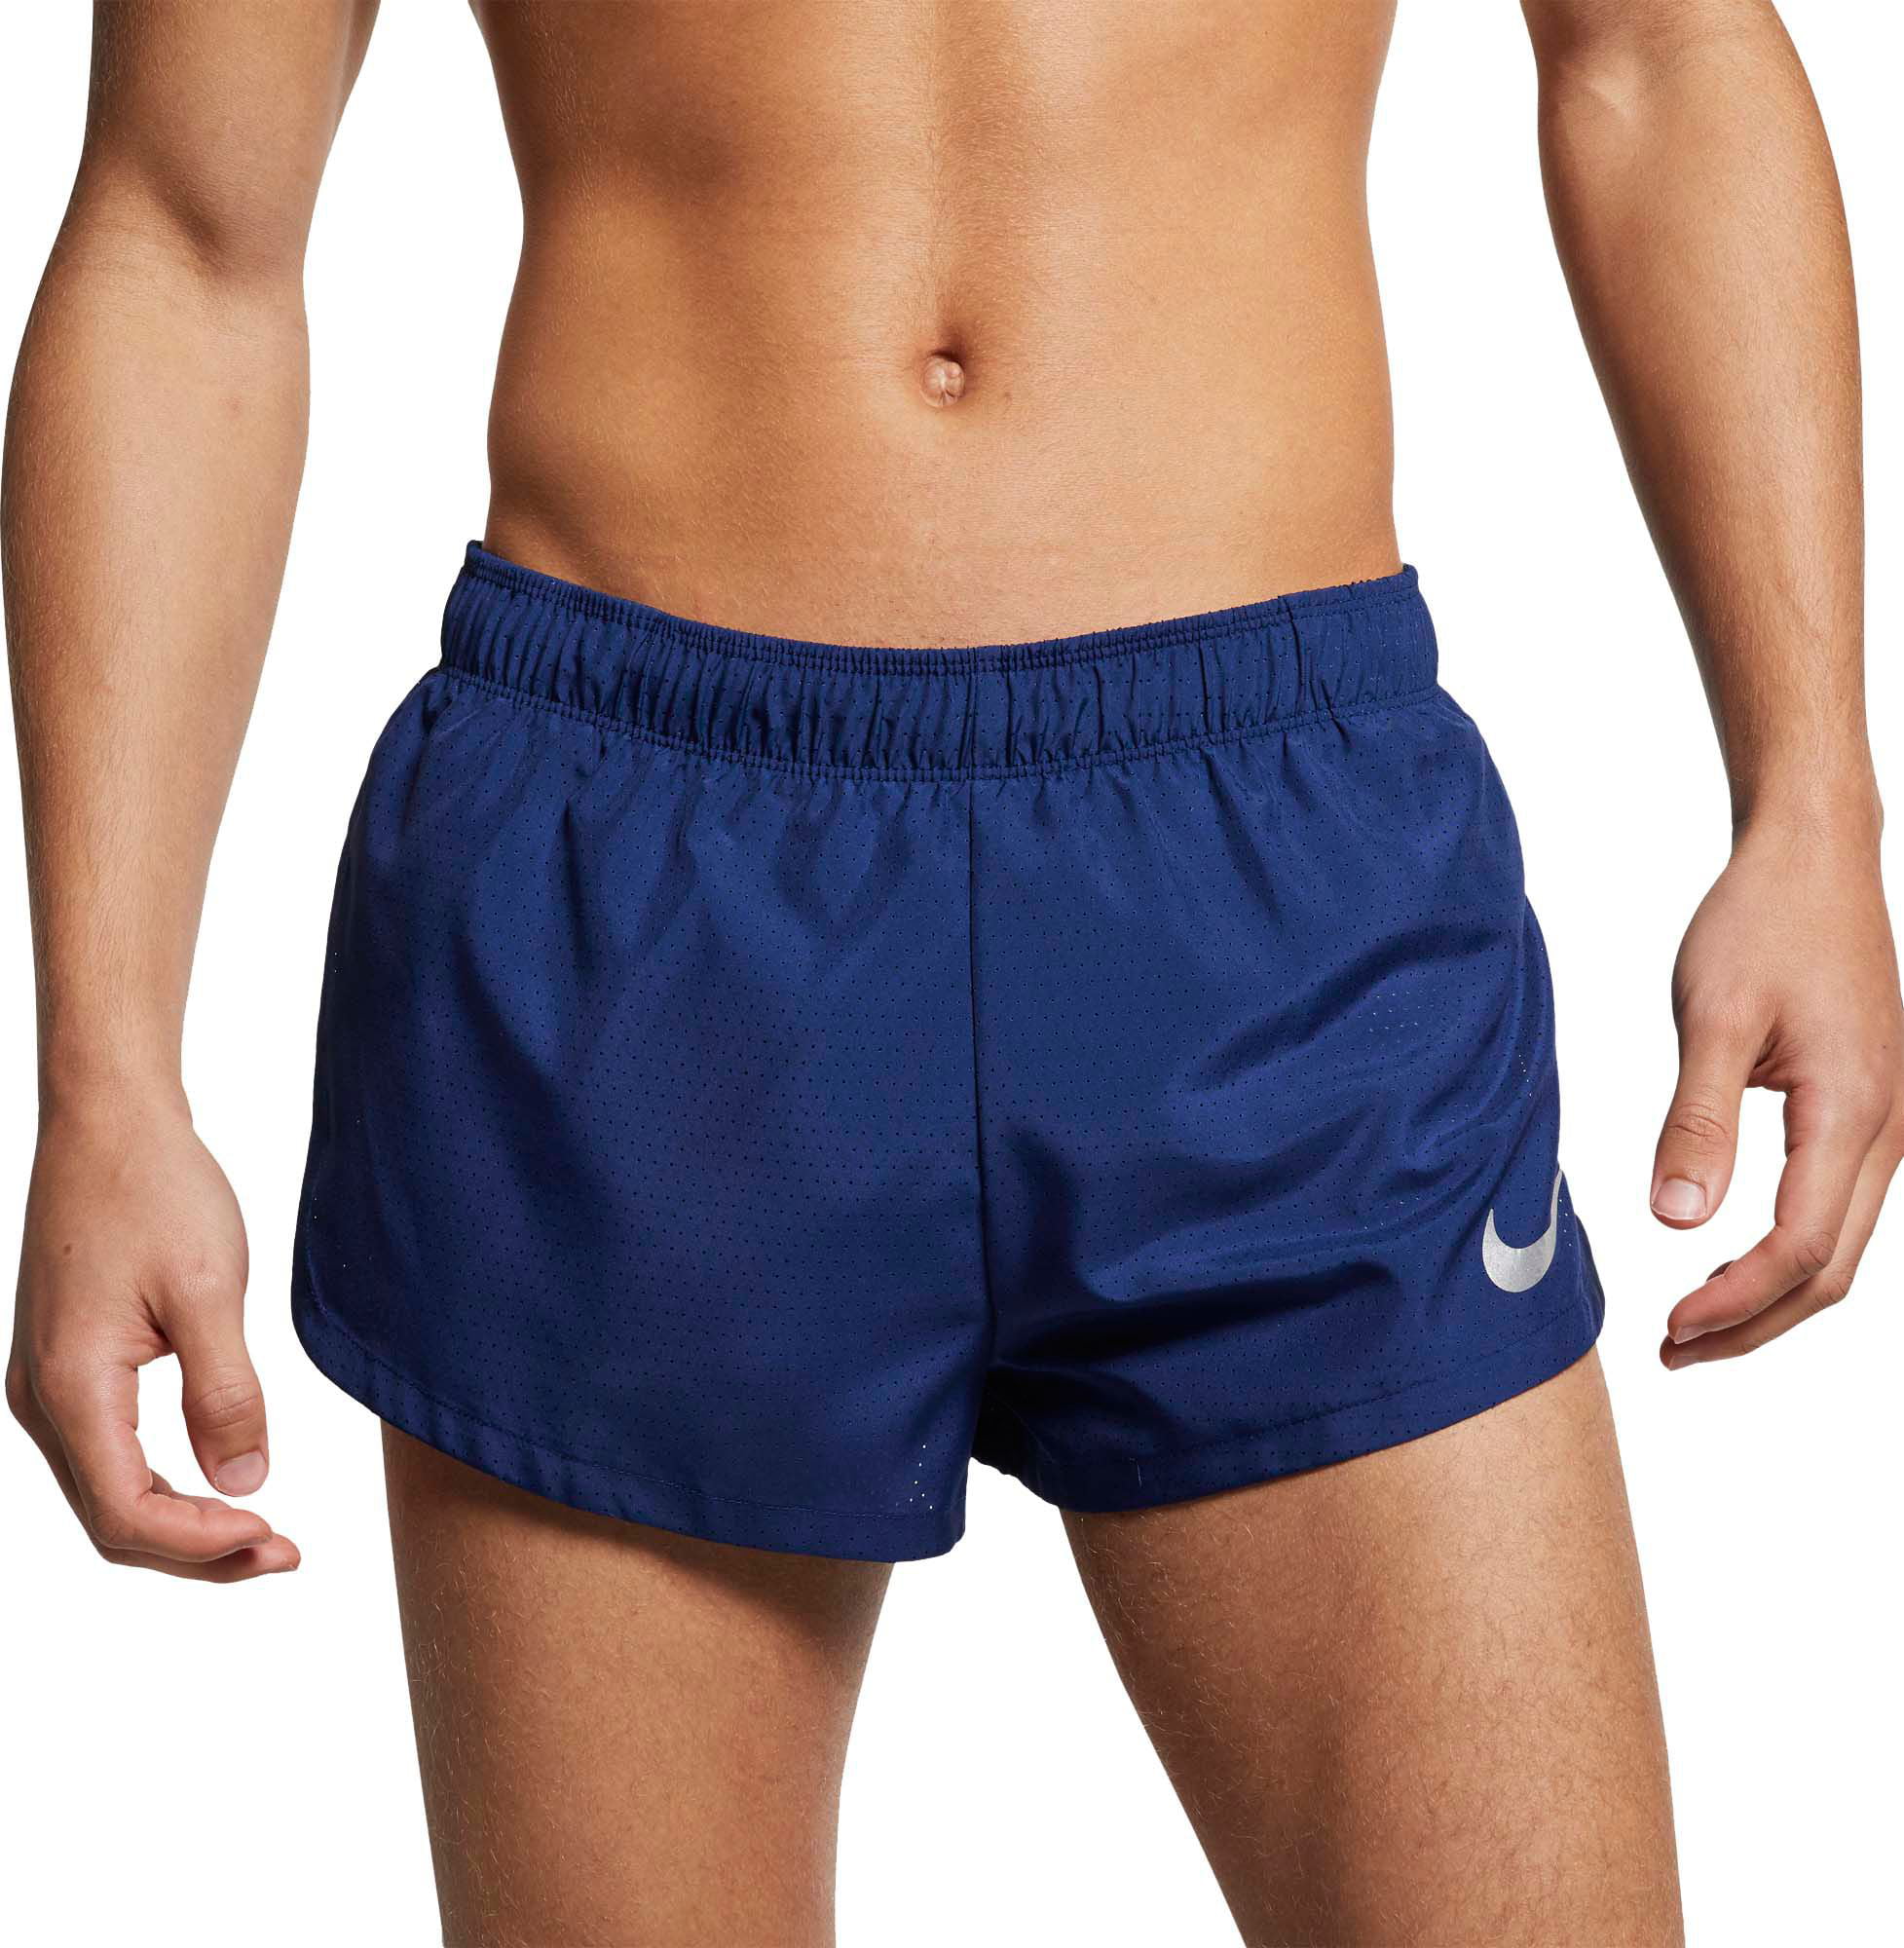 How To Find The Best Mens Shorts Telegraph